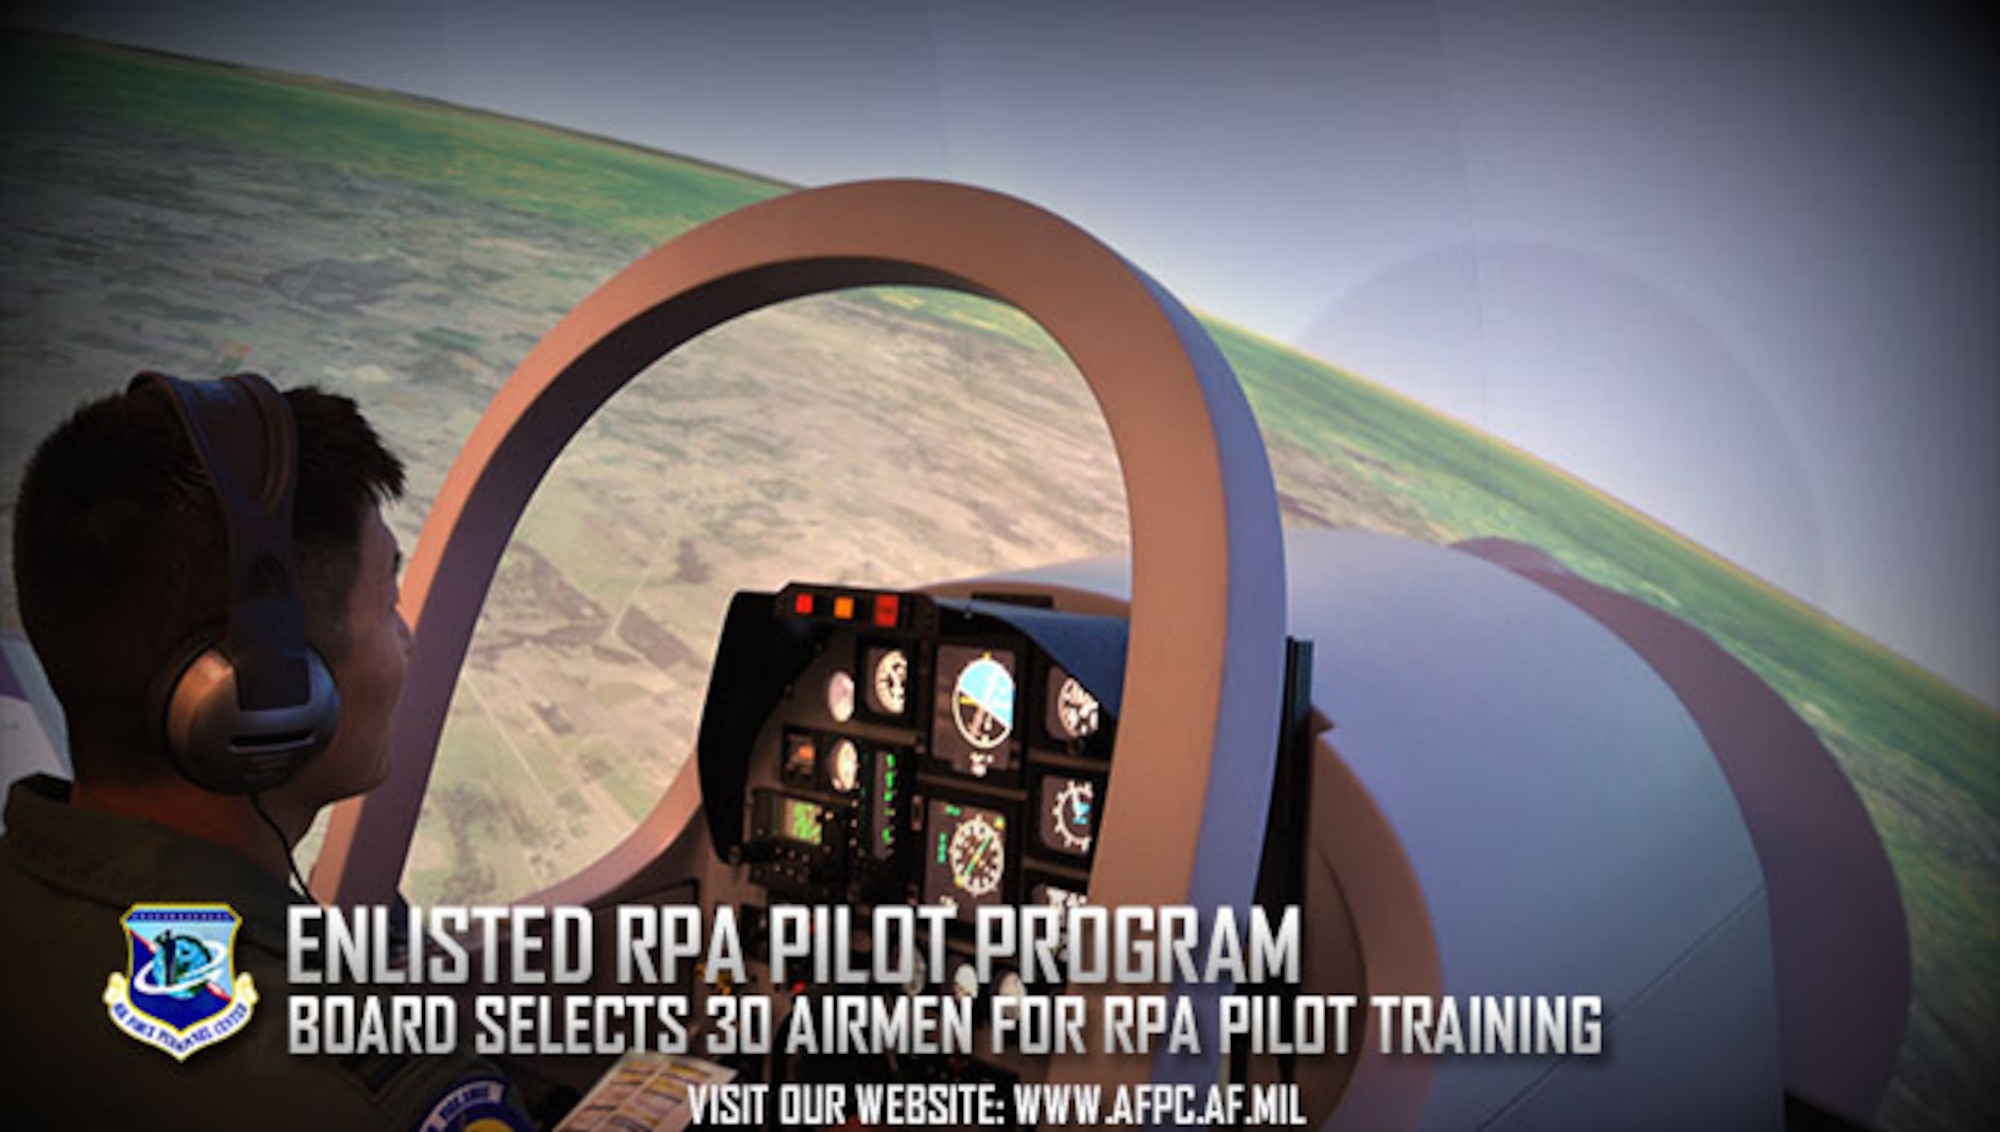 A student pilot enrolled in Undergraduate Remotely Piloted Aircraft Training at the 558th Flying Training Squadron, Joint Base San Antonio-Randolph, Texas, takes off in a new T-6 Texan II simulator. The inaugural enlisted remotely piloted aircraft pilot selection board has selected 30 enlisted Airmen for RPA pilot training, joining the 12 Airmen in the Enlisted Pilot Initial Class. (U.S. Air Force photo by Staff Sgt. Clinton Atkins)